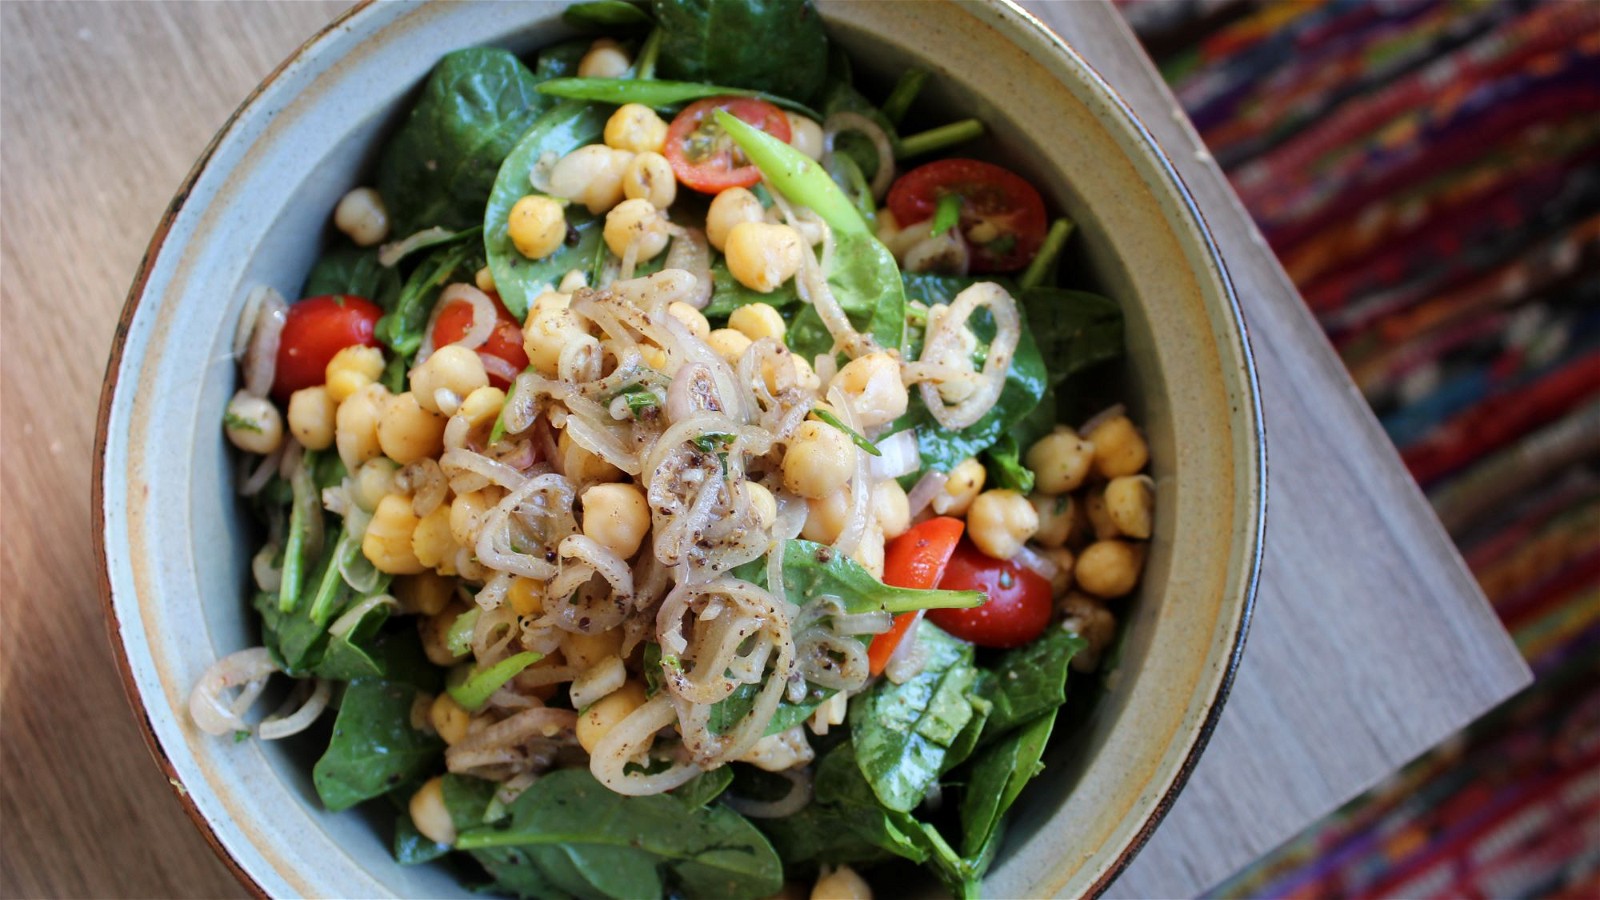 Image of Spinach & Chickpea Salad with Mint Vinaigrette